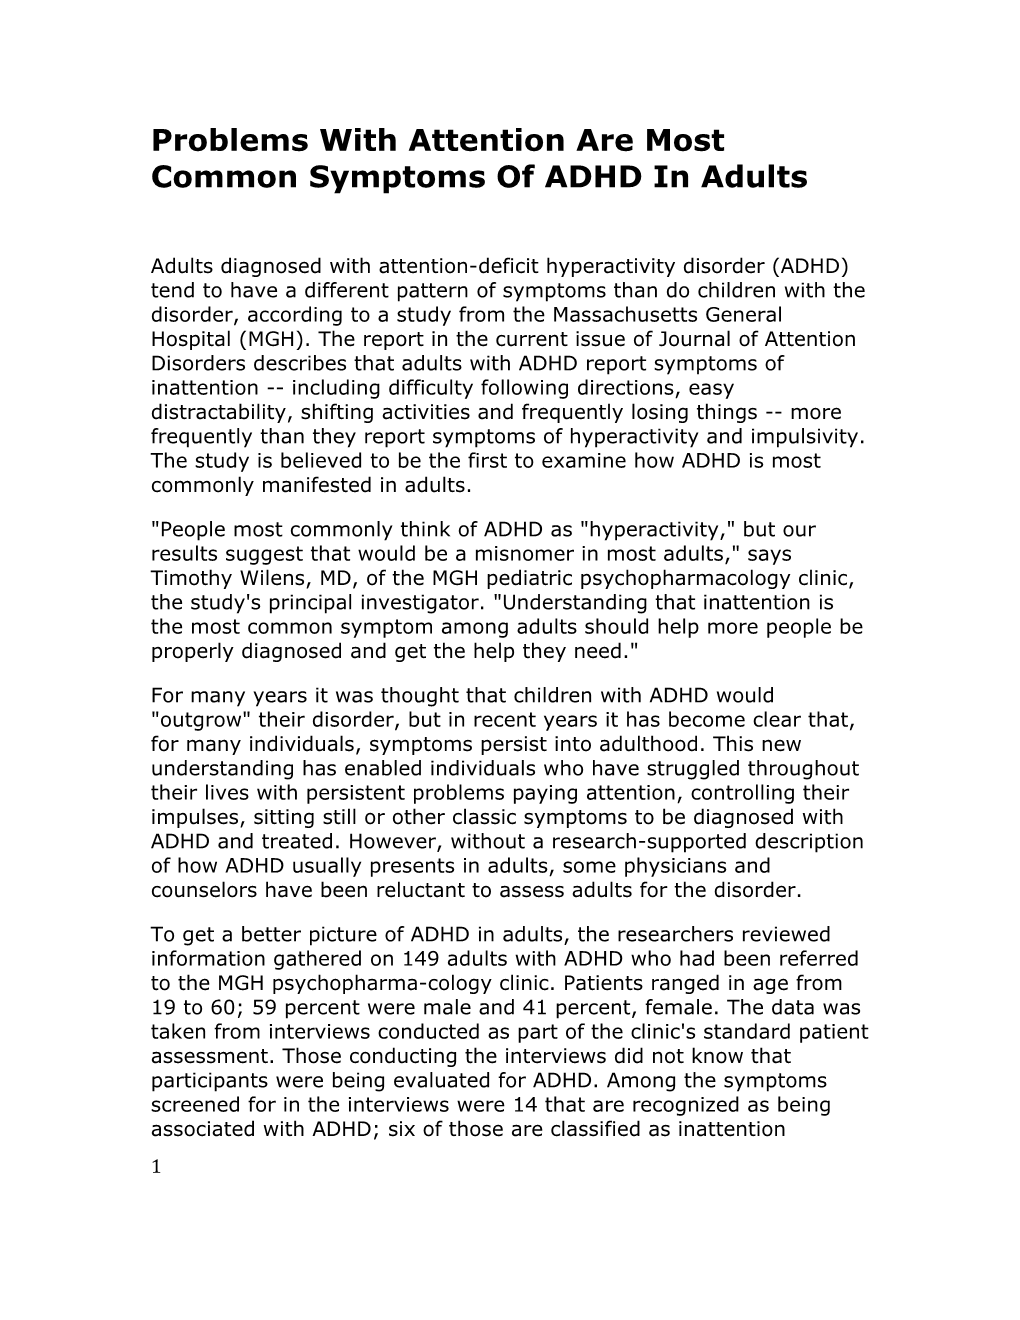 Problems with Attention Are Most Common Symptoms of ADHD in Adults